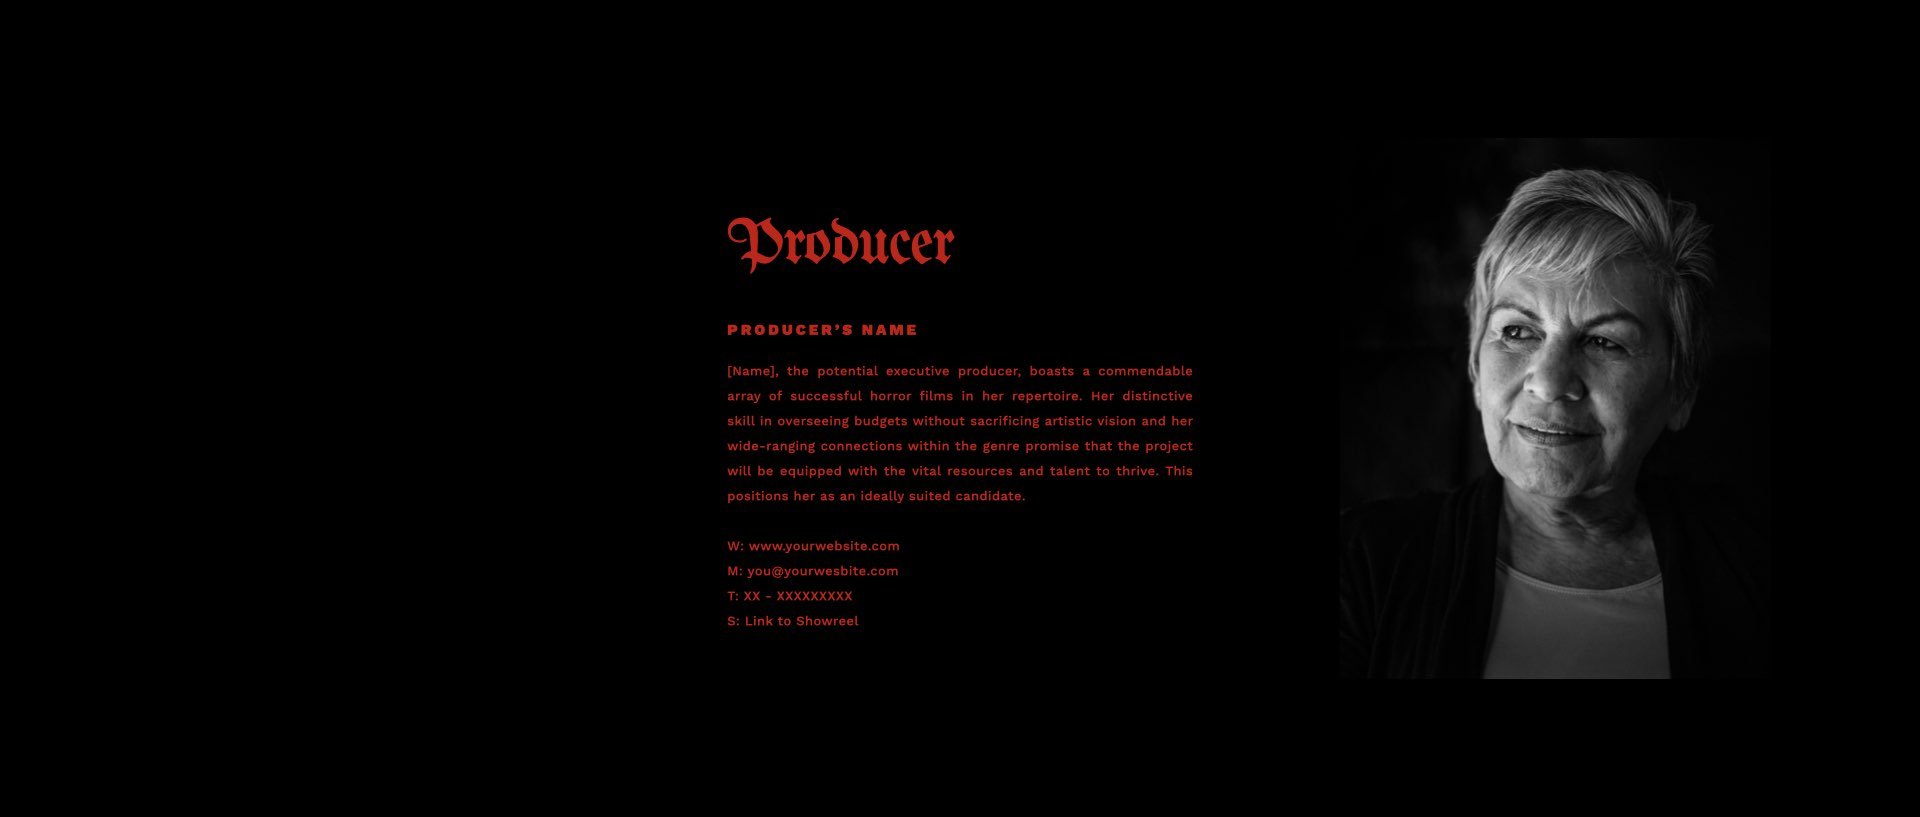 ‎Film Pitch Deck Template - Sinister Obsession.‎027.jpeg